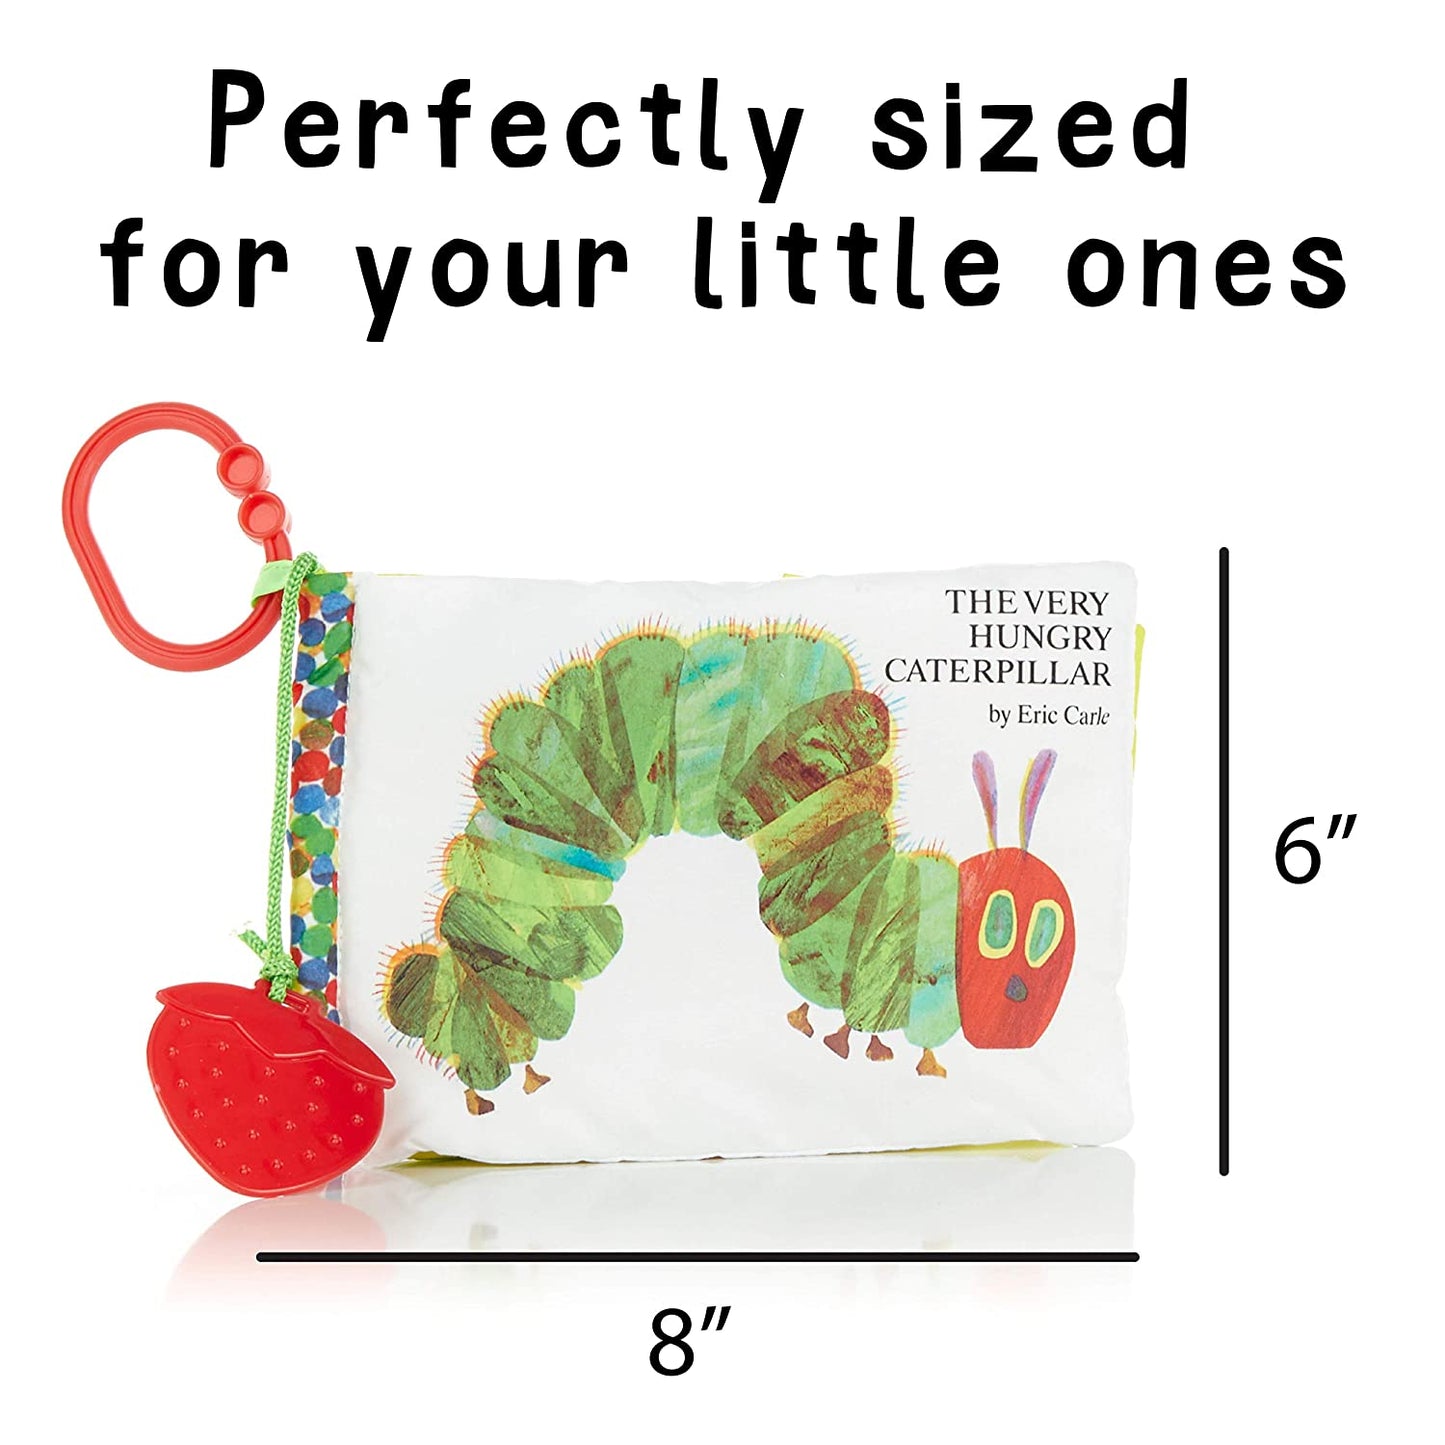 World of Eric Carle, The Very Hungry Caterpillar Soft Baby Toy Book